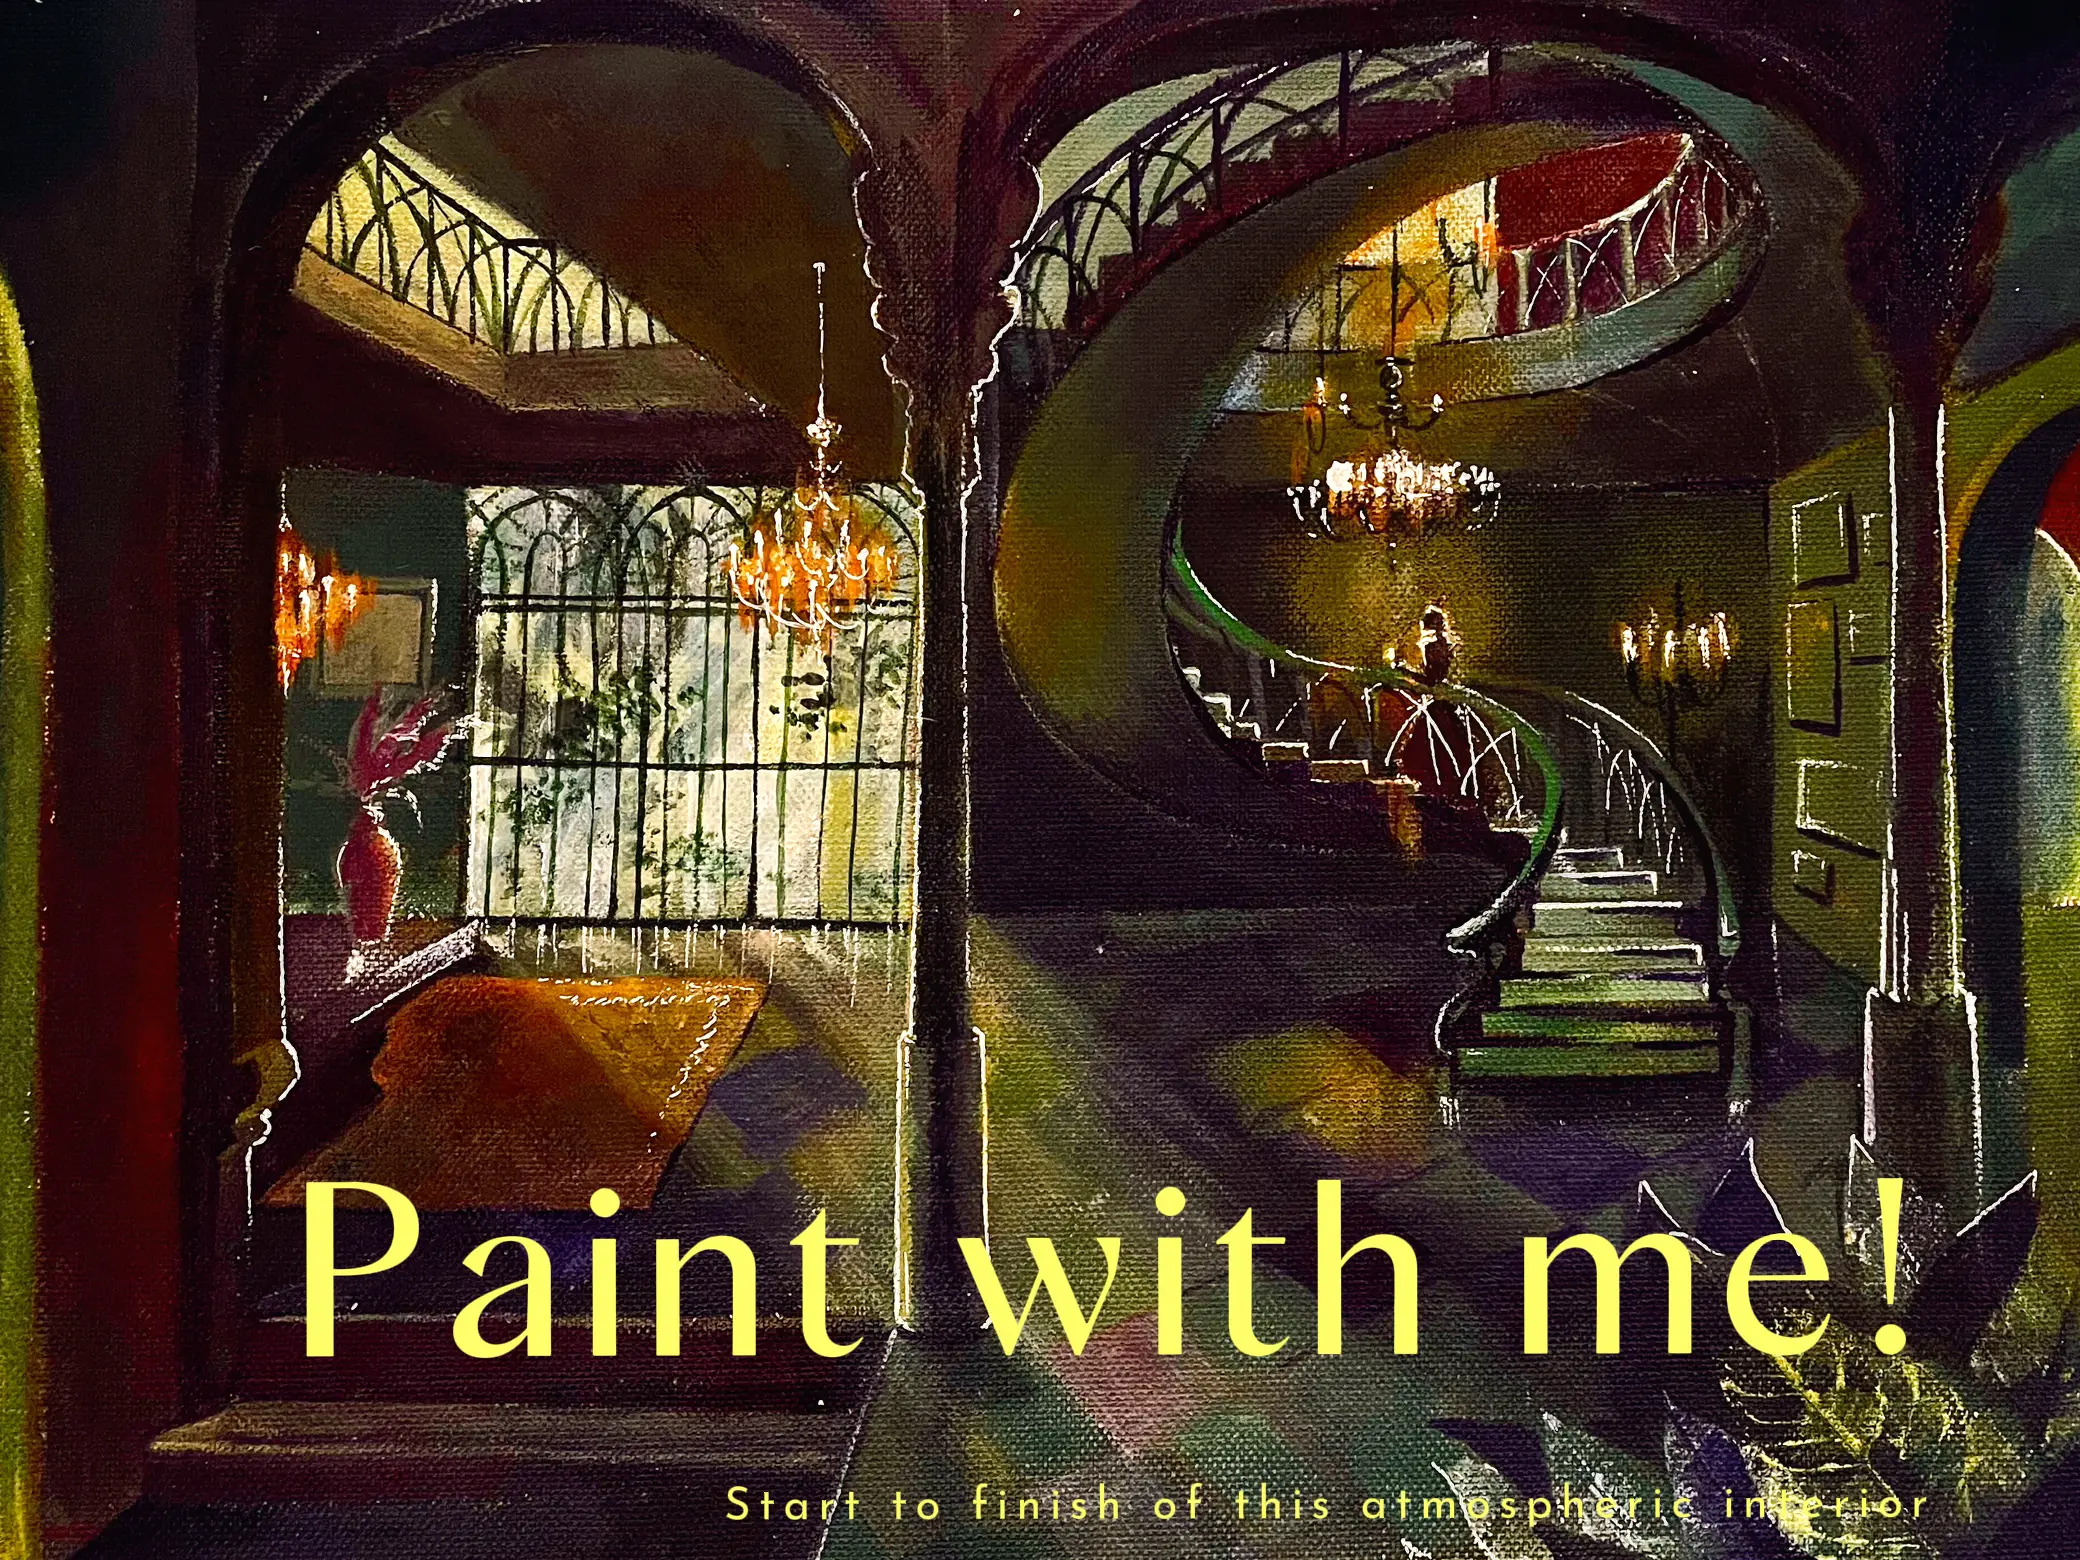 Paint with me!, Gallery posted by Adriana Tomeci